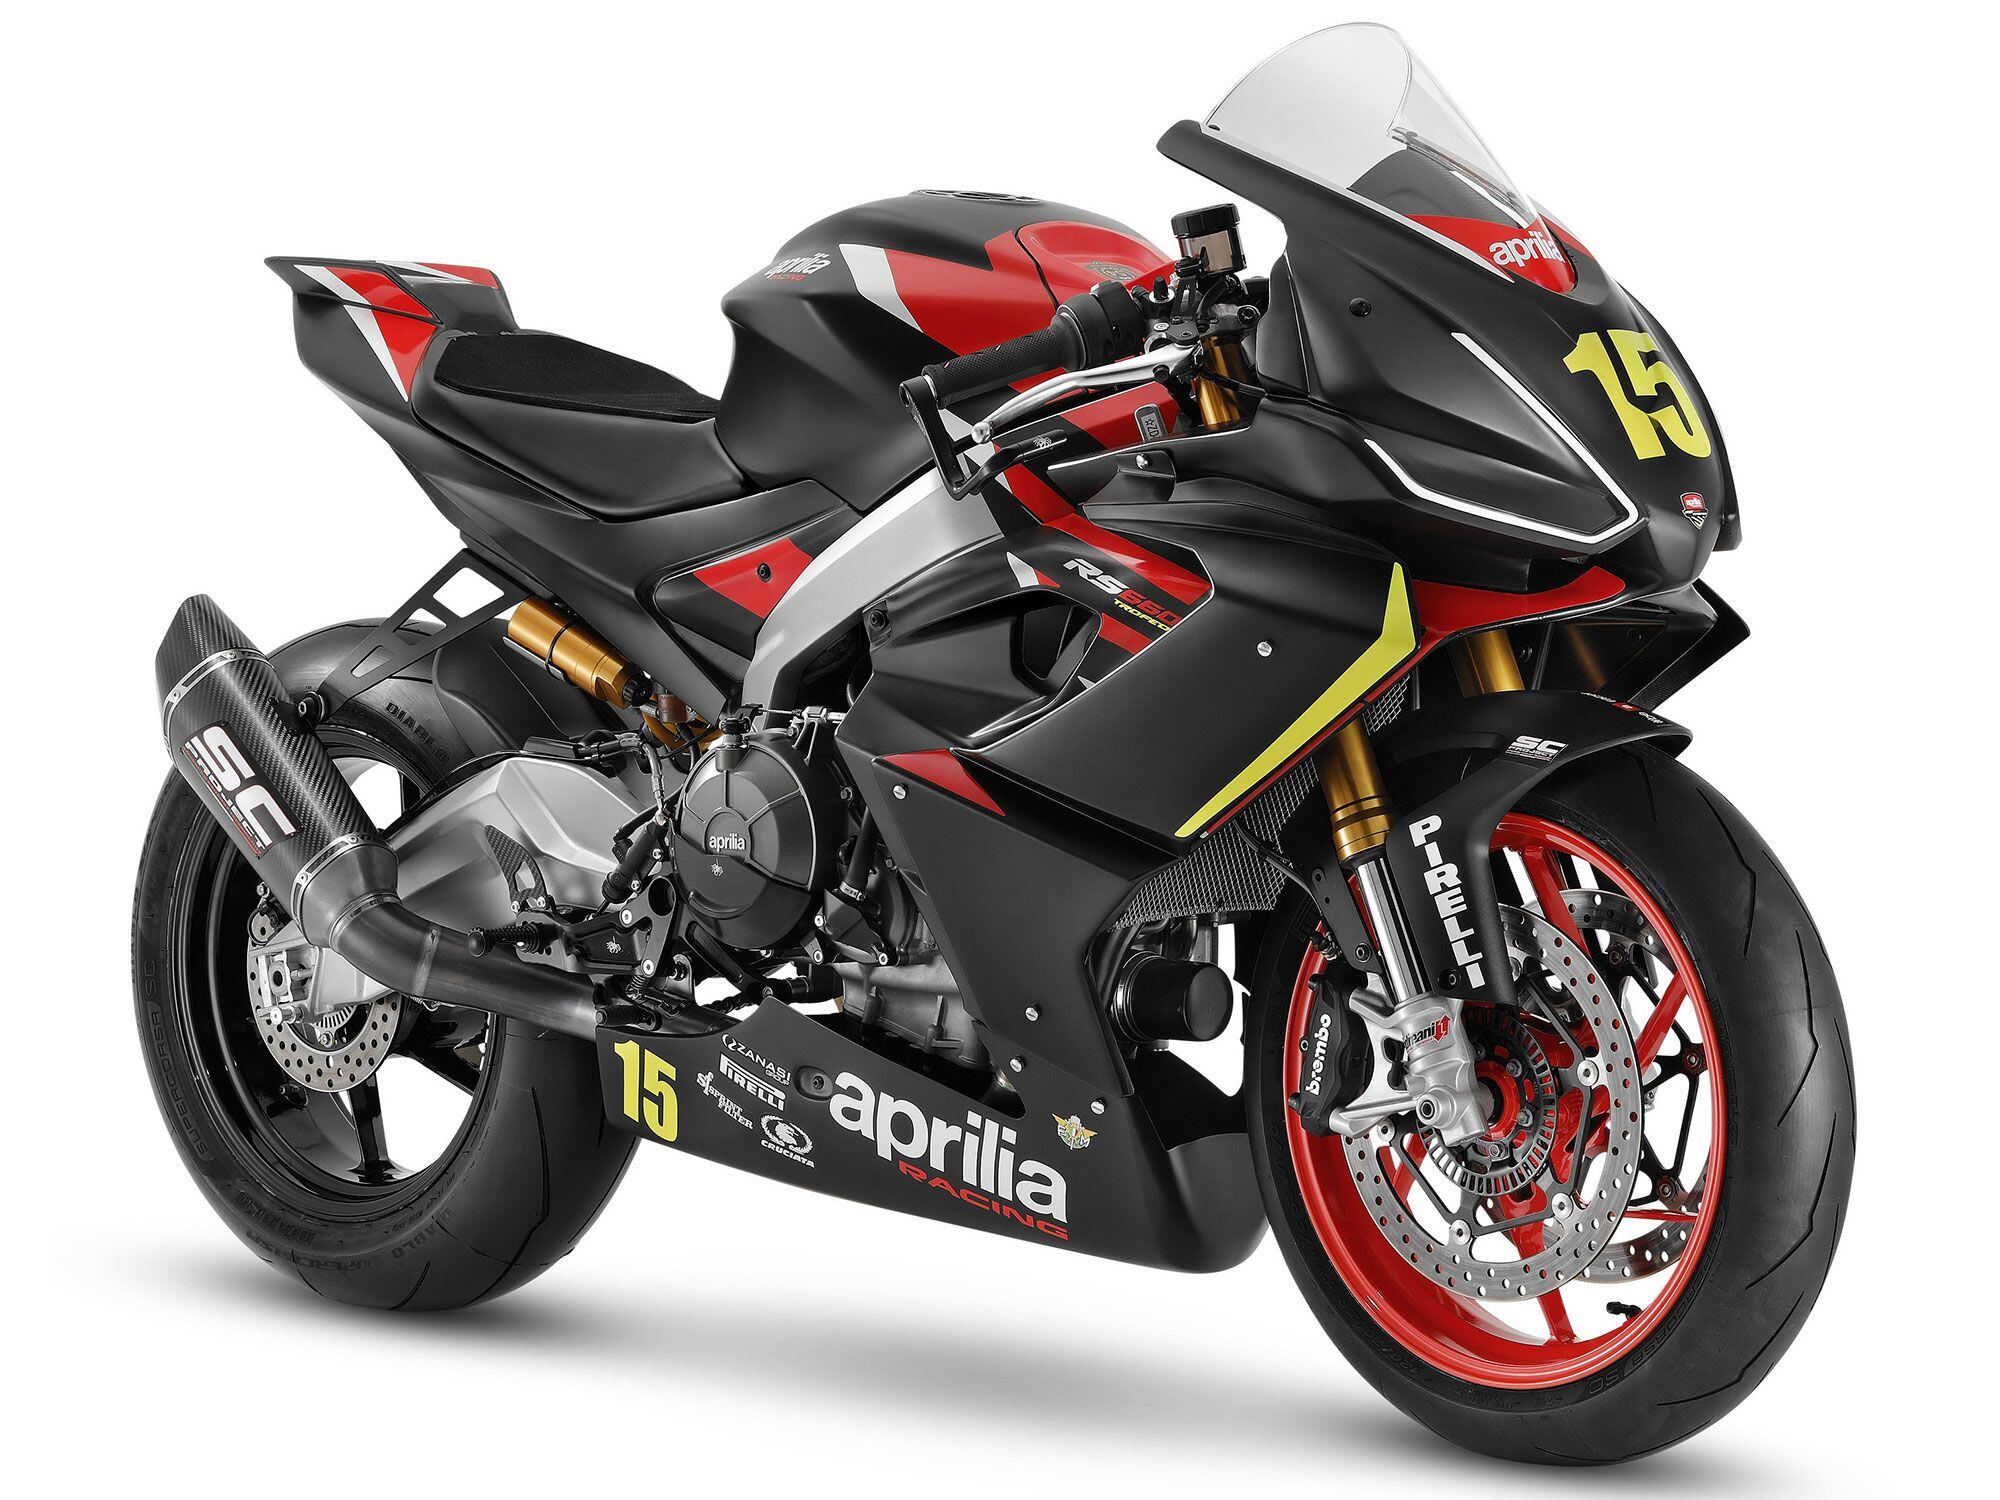 Aprilia has rolled out the RS 660 Trofeo as another track-ready training tool for aspiring young racers.